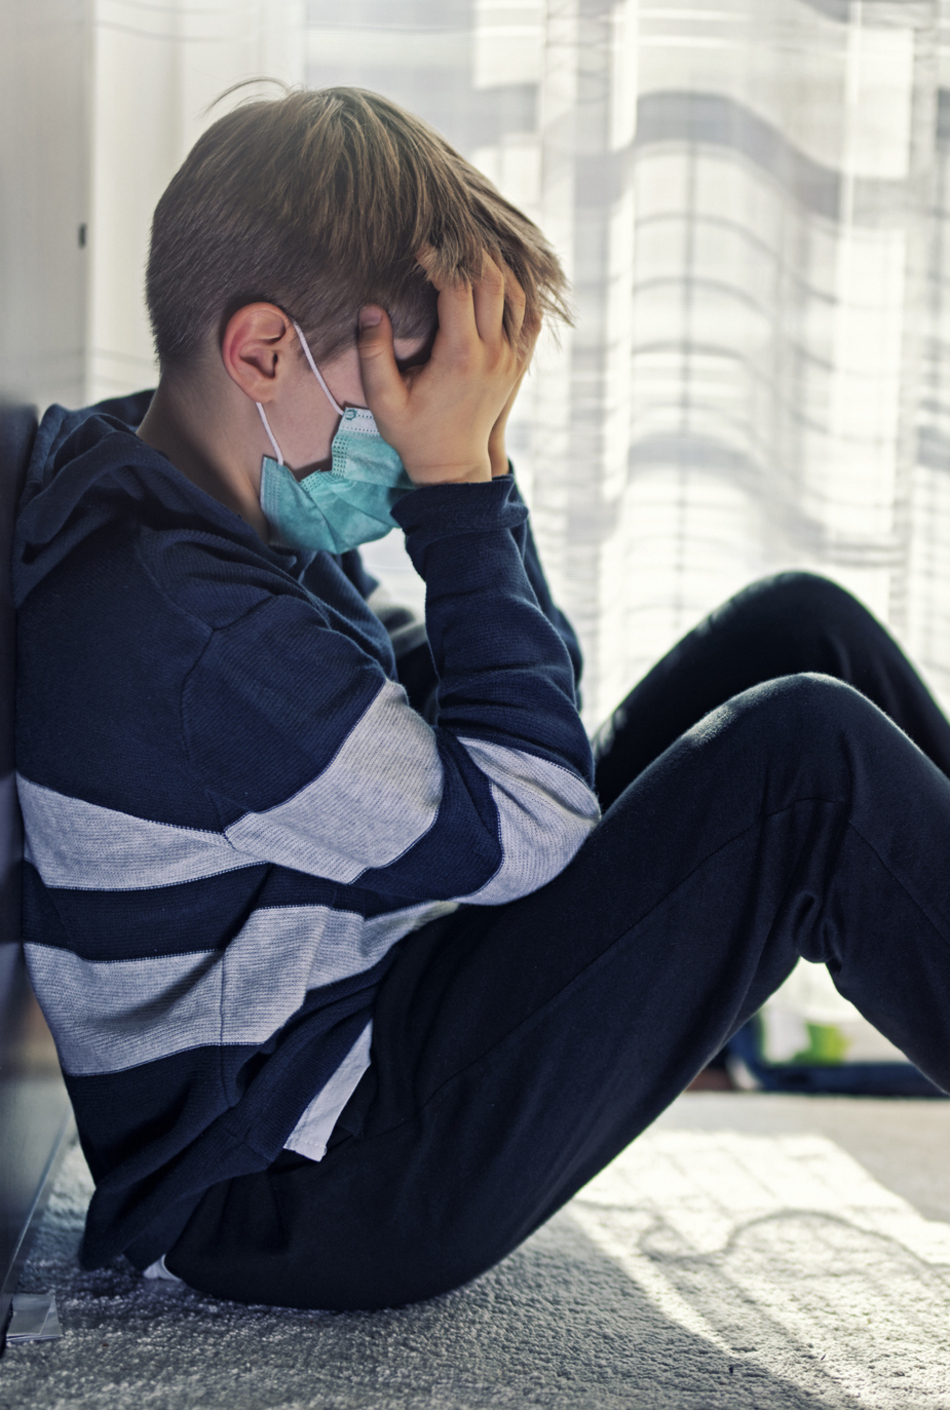 Reducing Pandemic Fatigue in Your Kids